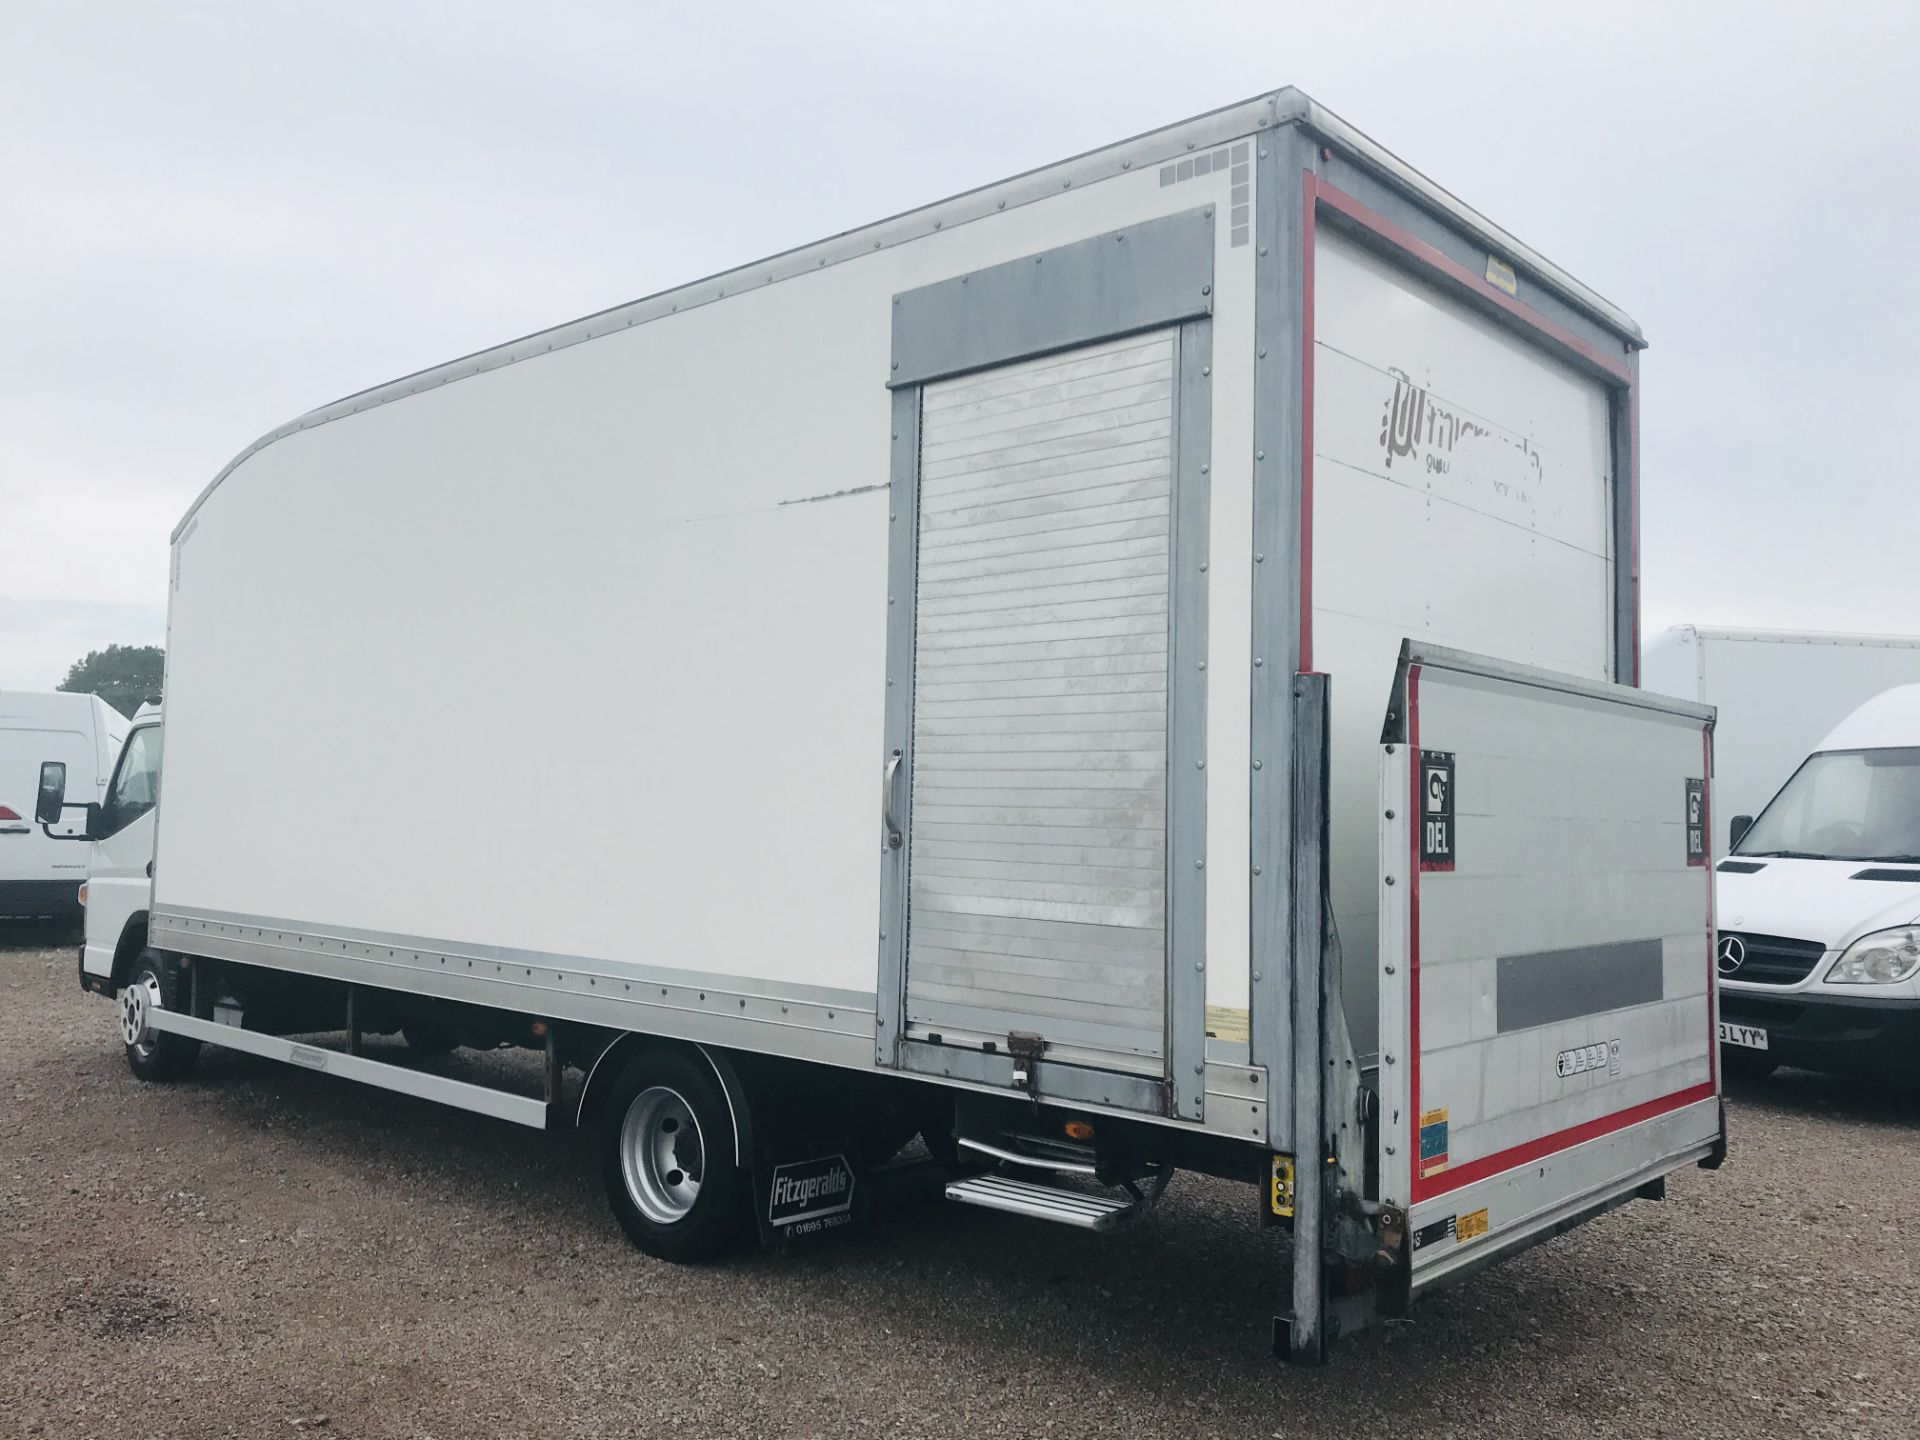 On Sale FUSO CANTER 7C15 "LWB" 22ft BOX VAN WITH ELECTRIC TAIL LIFT - 2017 MODEL - EURO 6 - ONLY 94K - Image 4 of 16